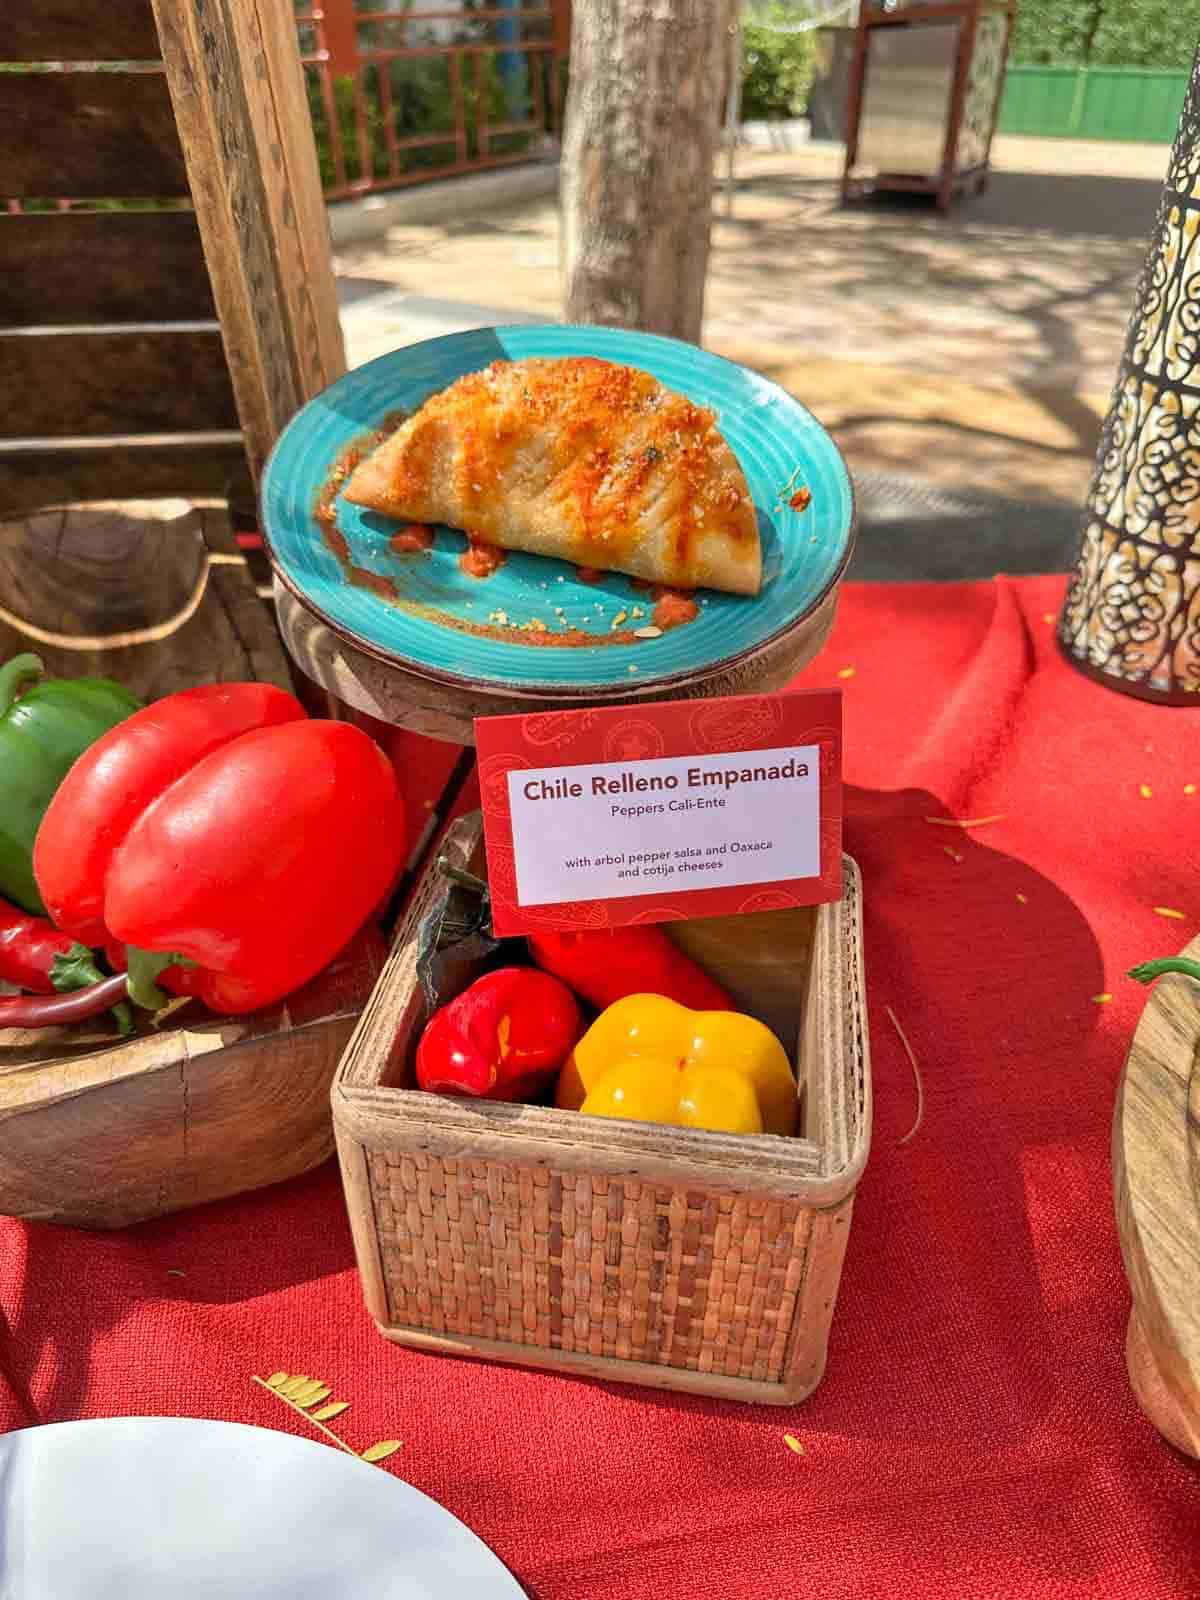 A turquoise plate with an empanada on it sitting above boxes with red and yellow peppers.